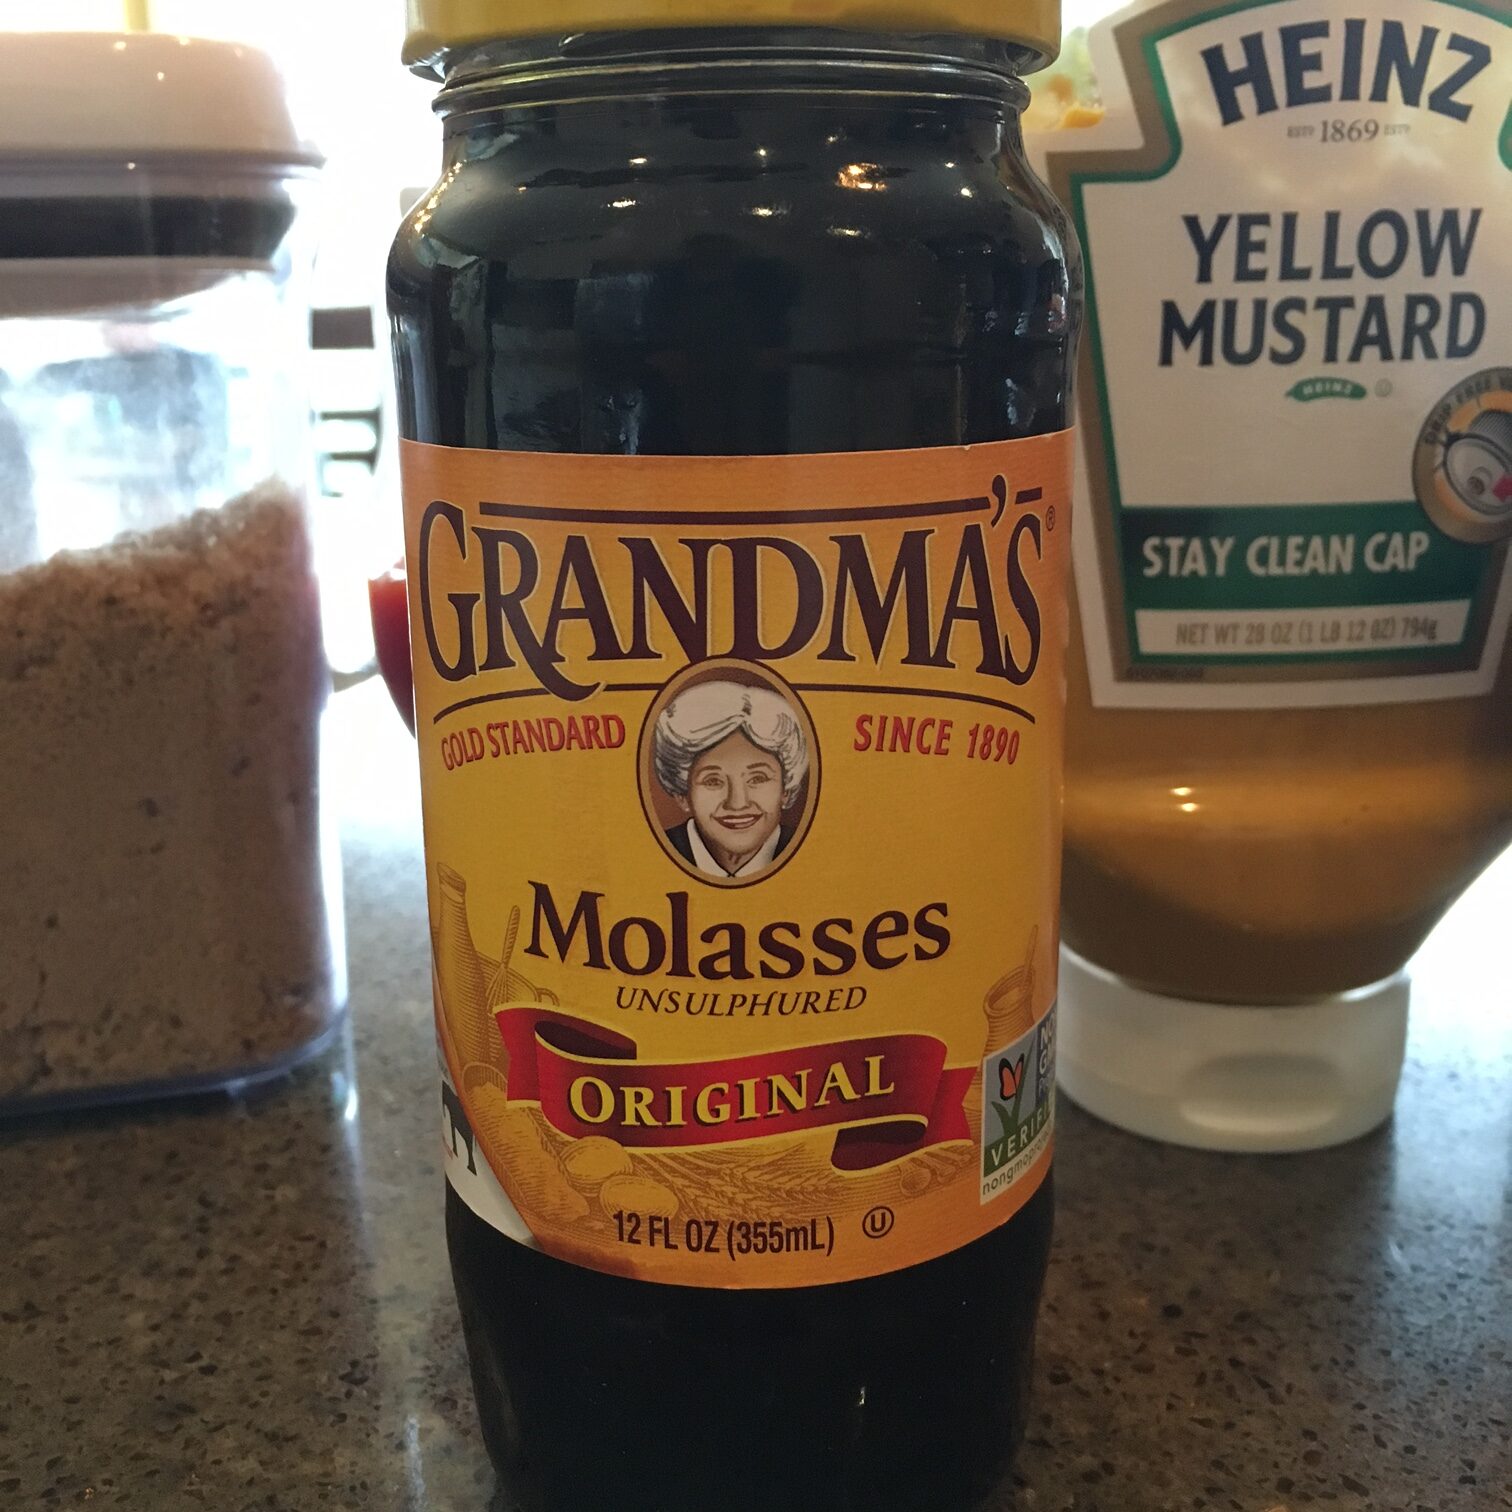 This is a photo of a jar of Grandma's unsulphured Molasses.